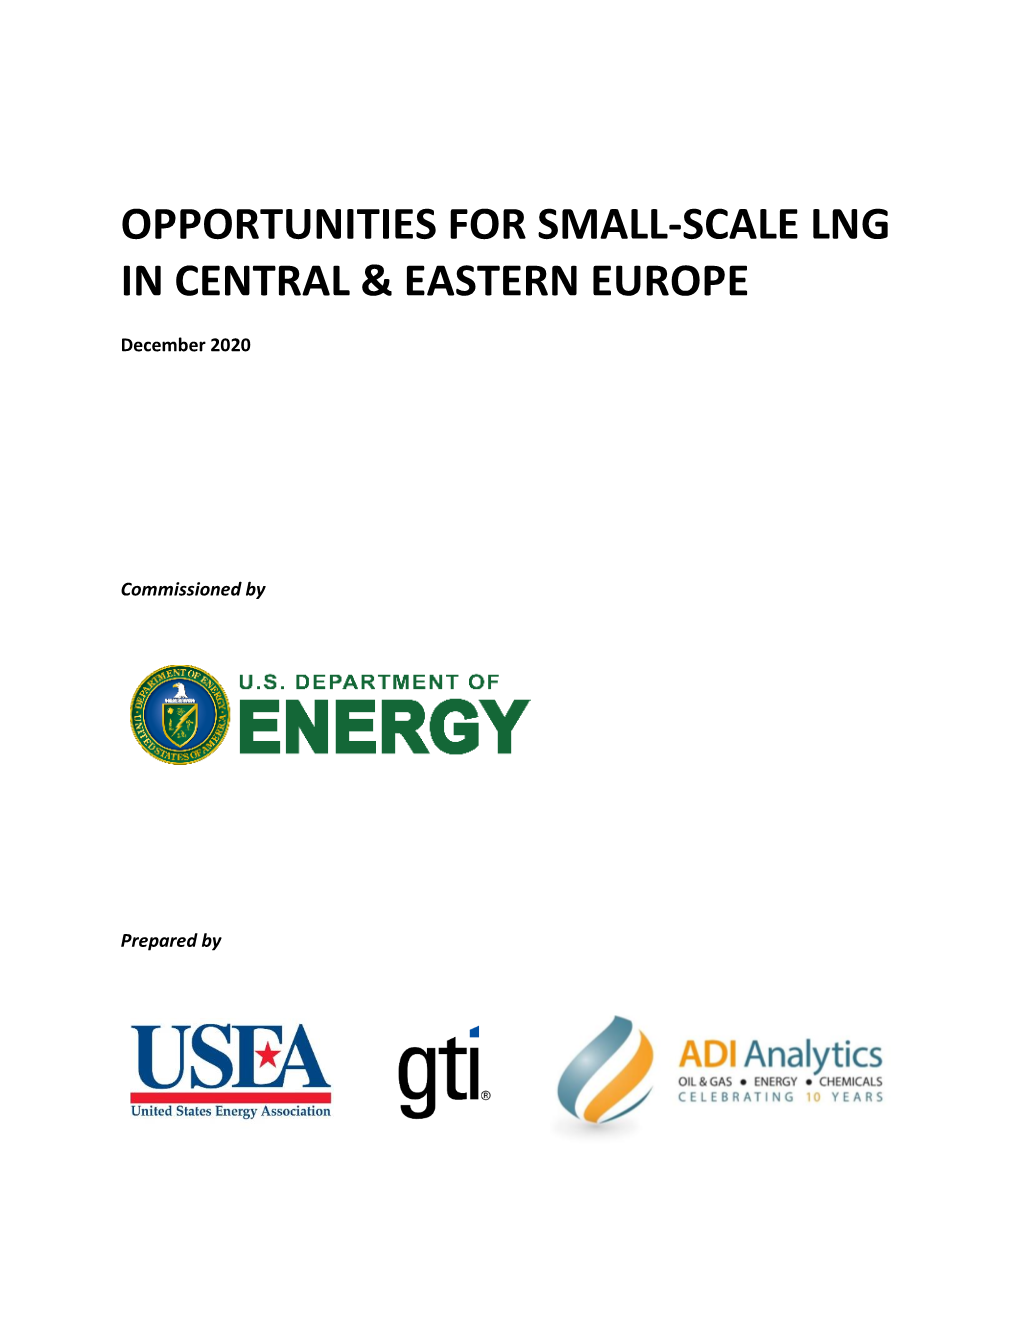 Opportunities for Small-Scale Lng in Central & Eastern Europe